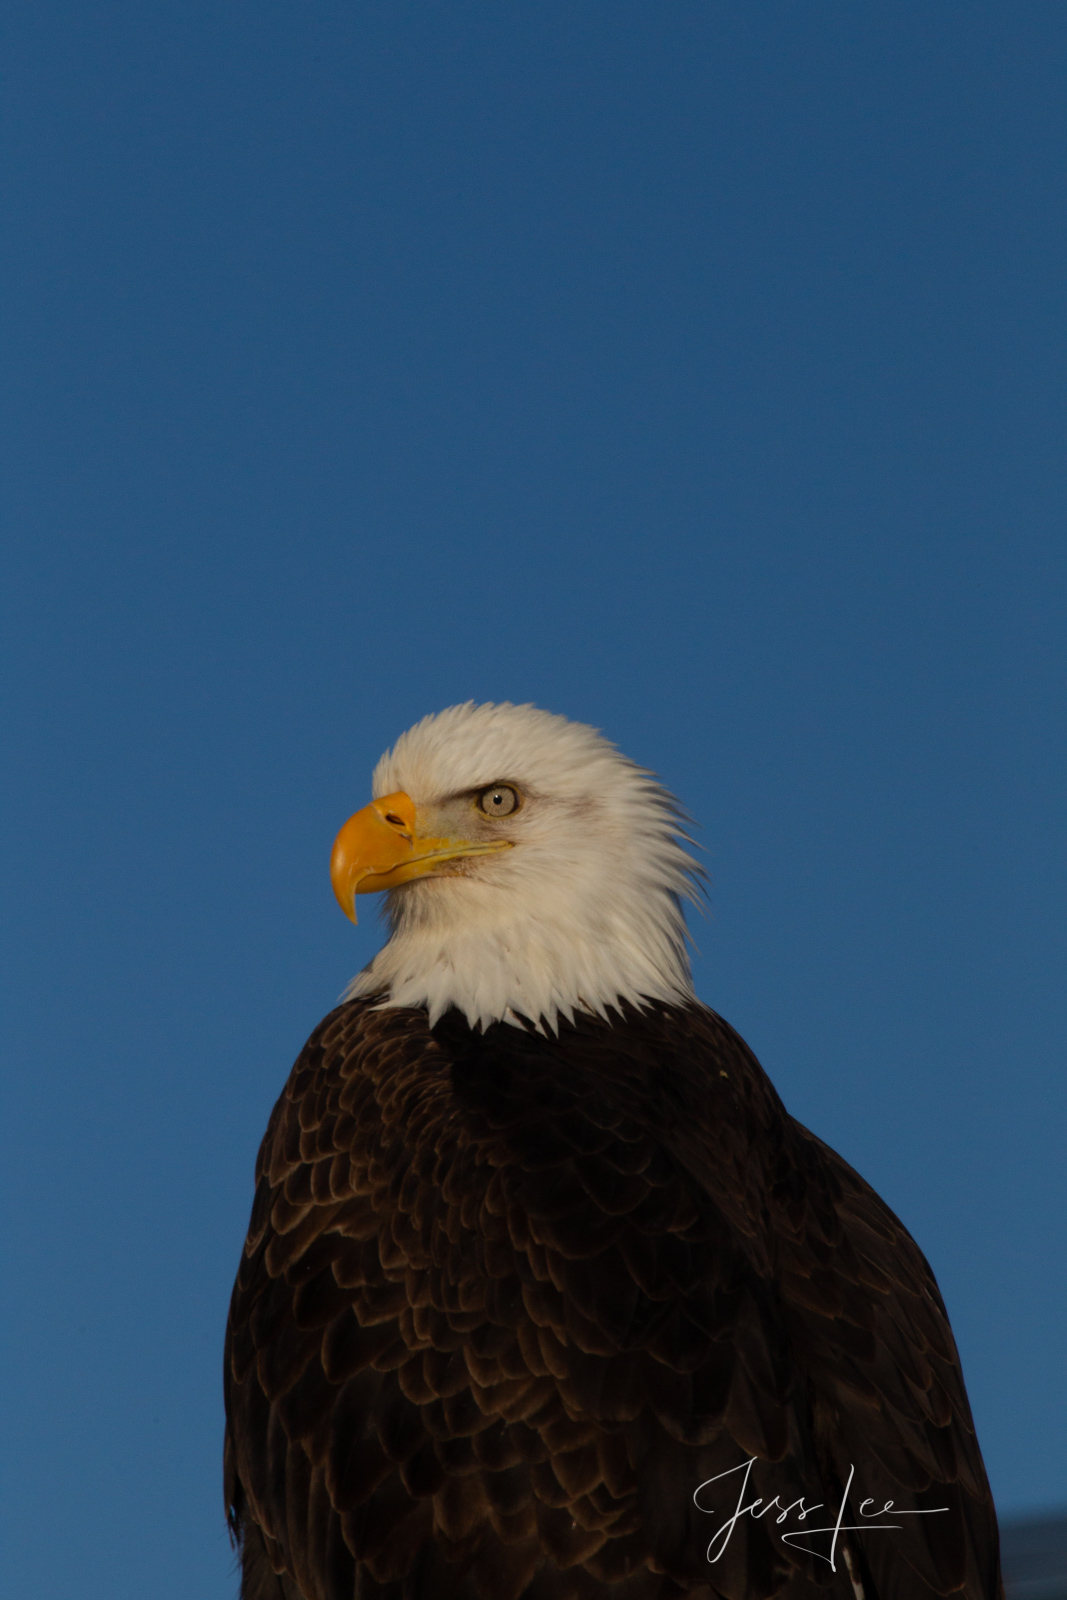 Bring home the power and beauty of the amazing fine art American Bald Eagle photograph Eagle Eye by Jess Lee from his Wildlife...